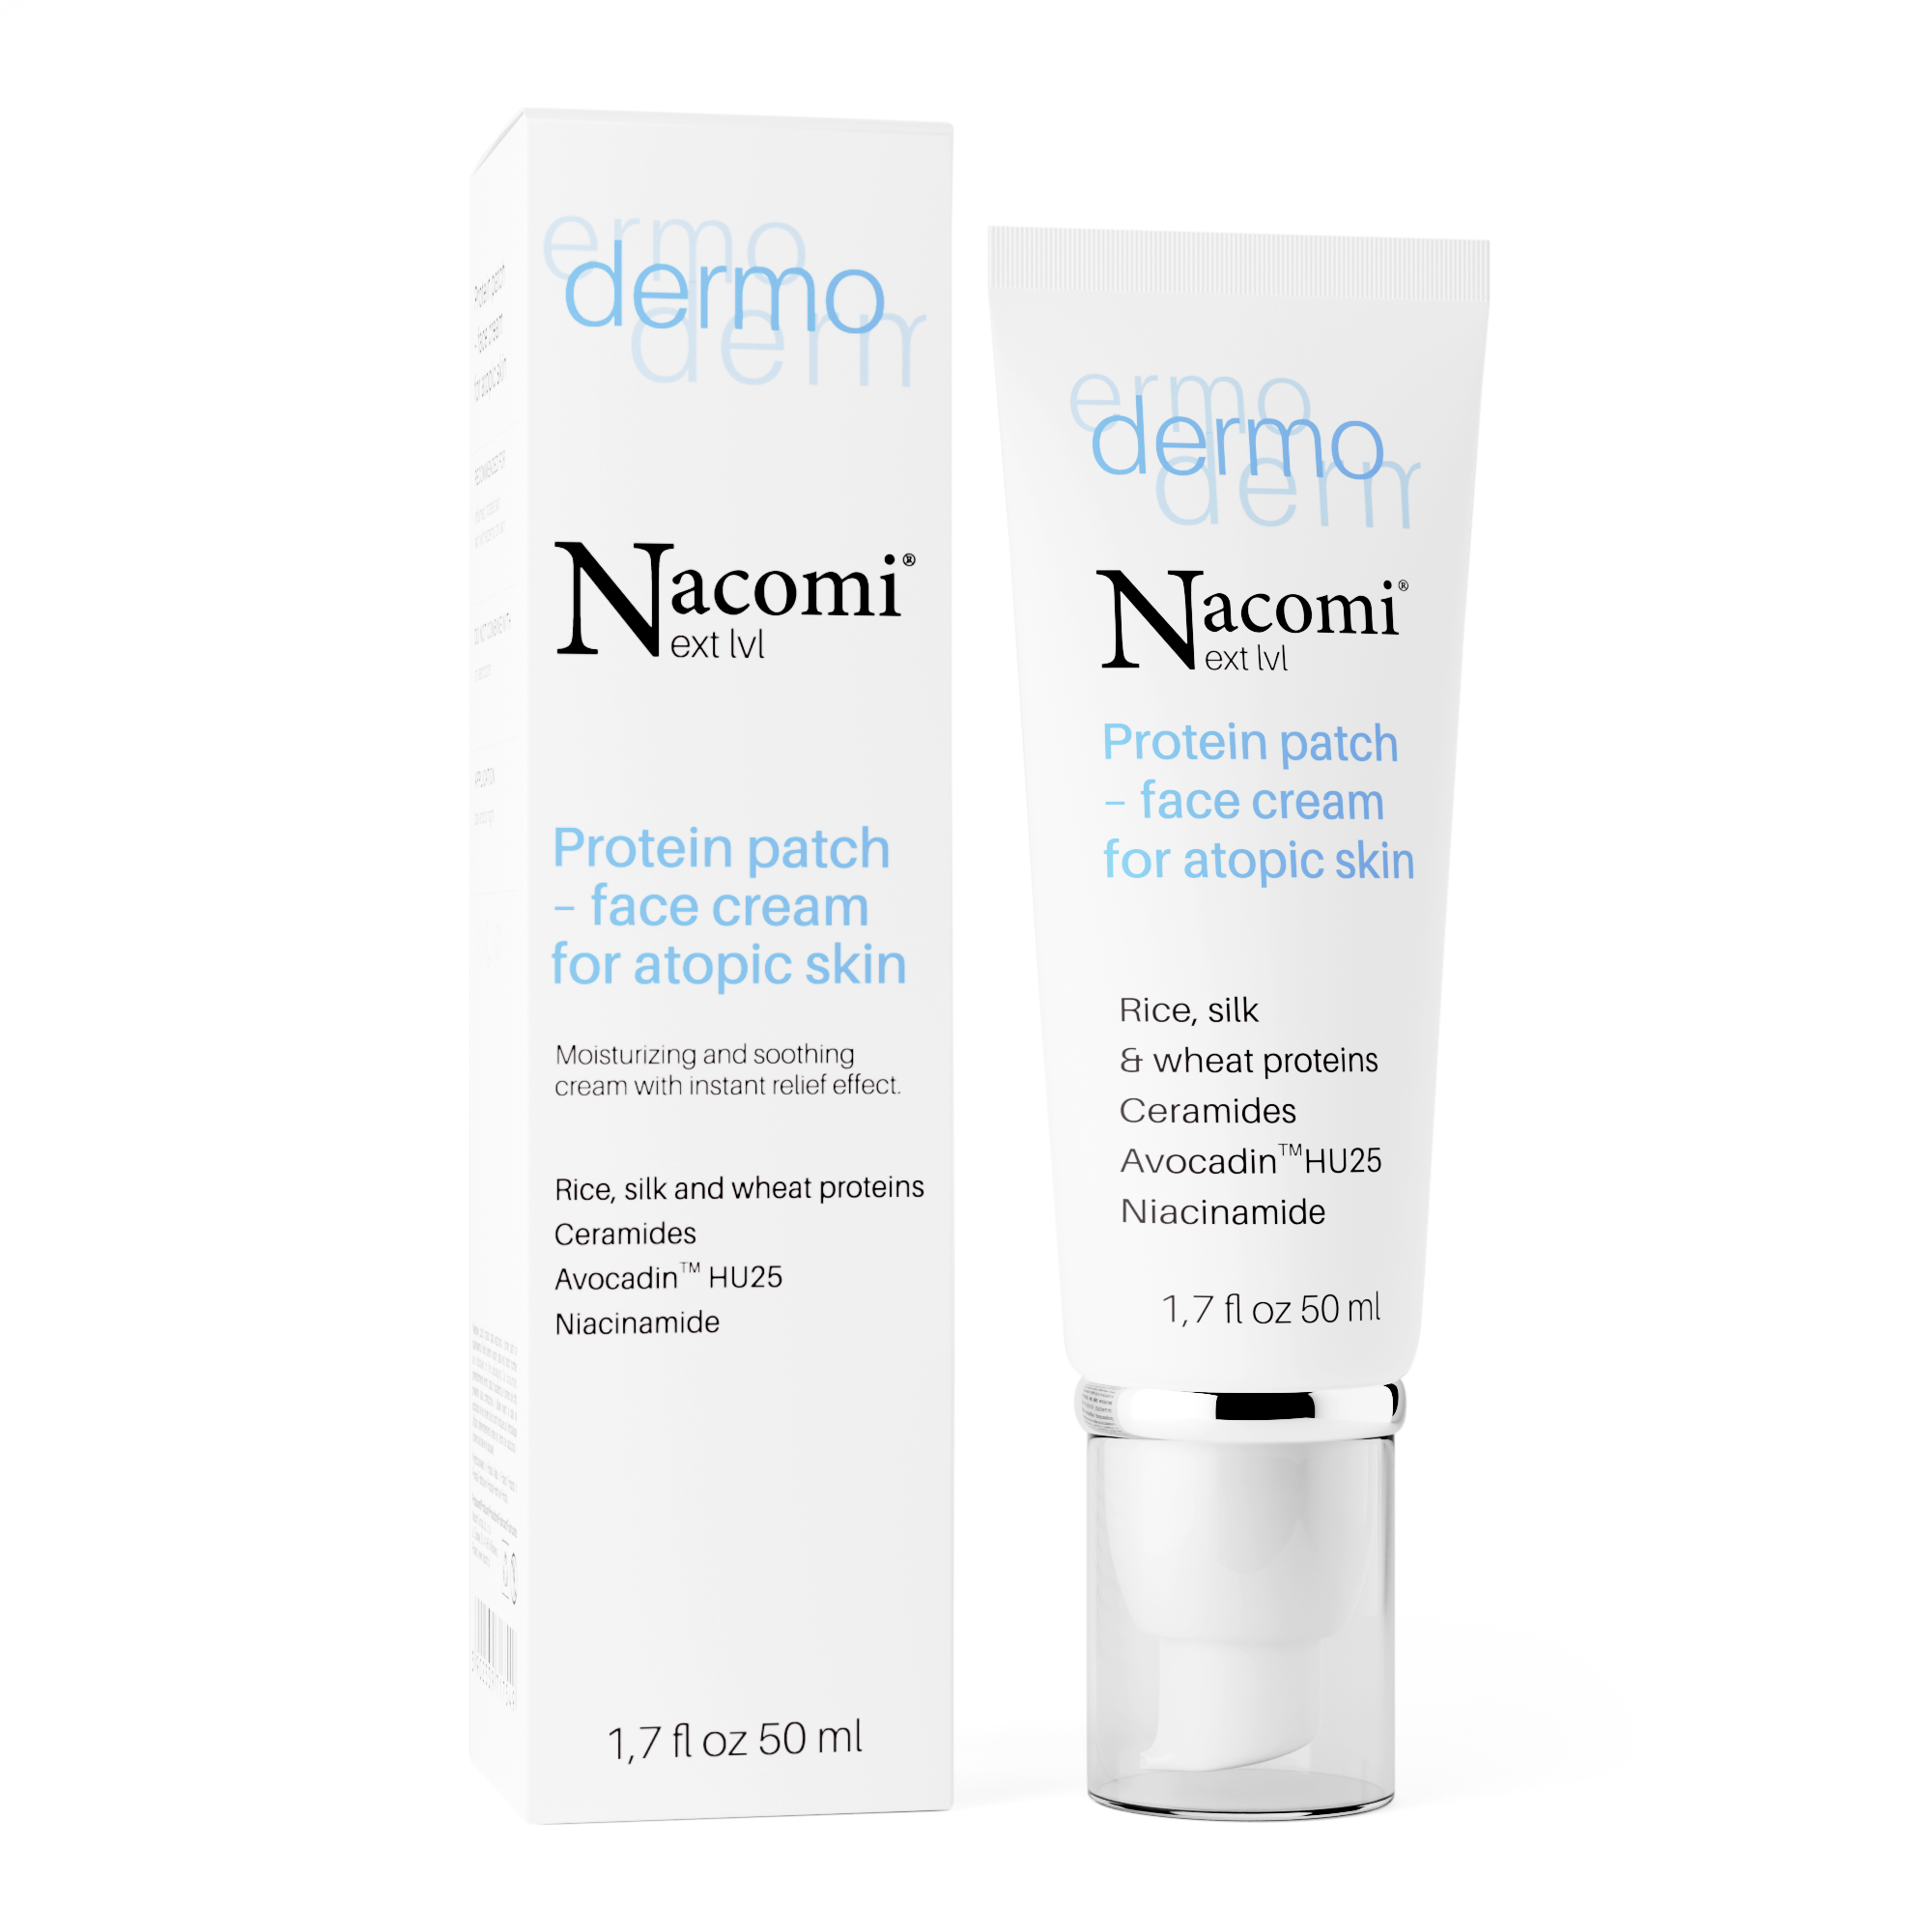 Nacomi Dermo Protein patch - Moisturizing and soothing face cream with instant relief effect 50ml